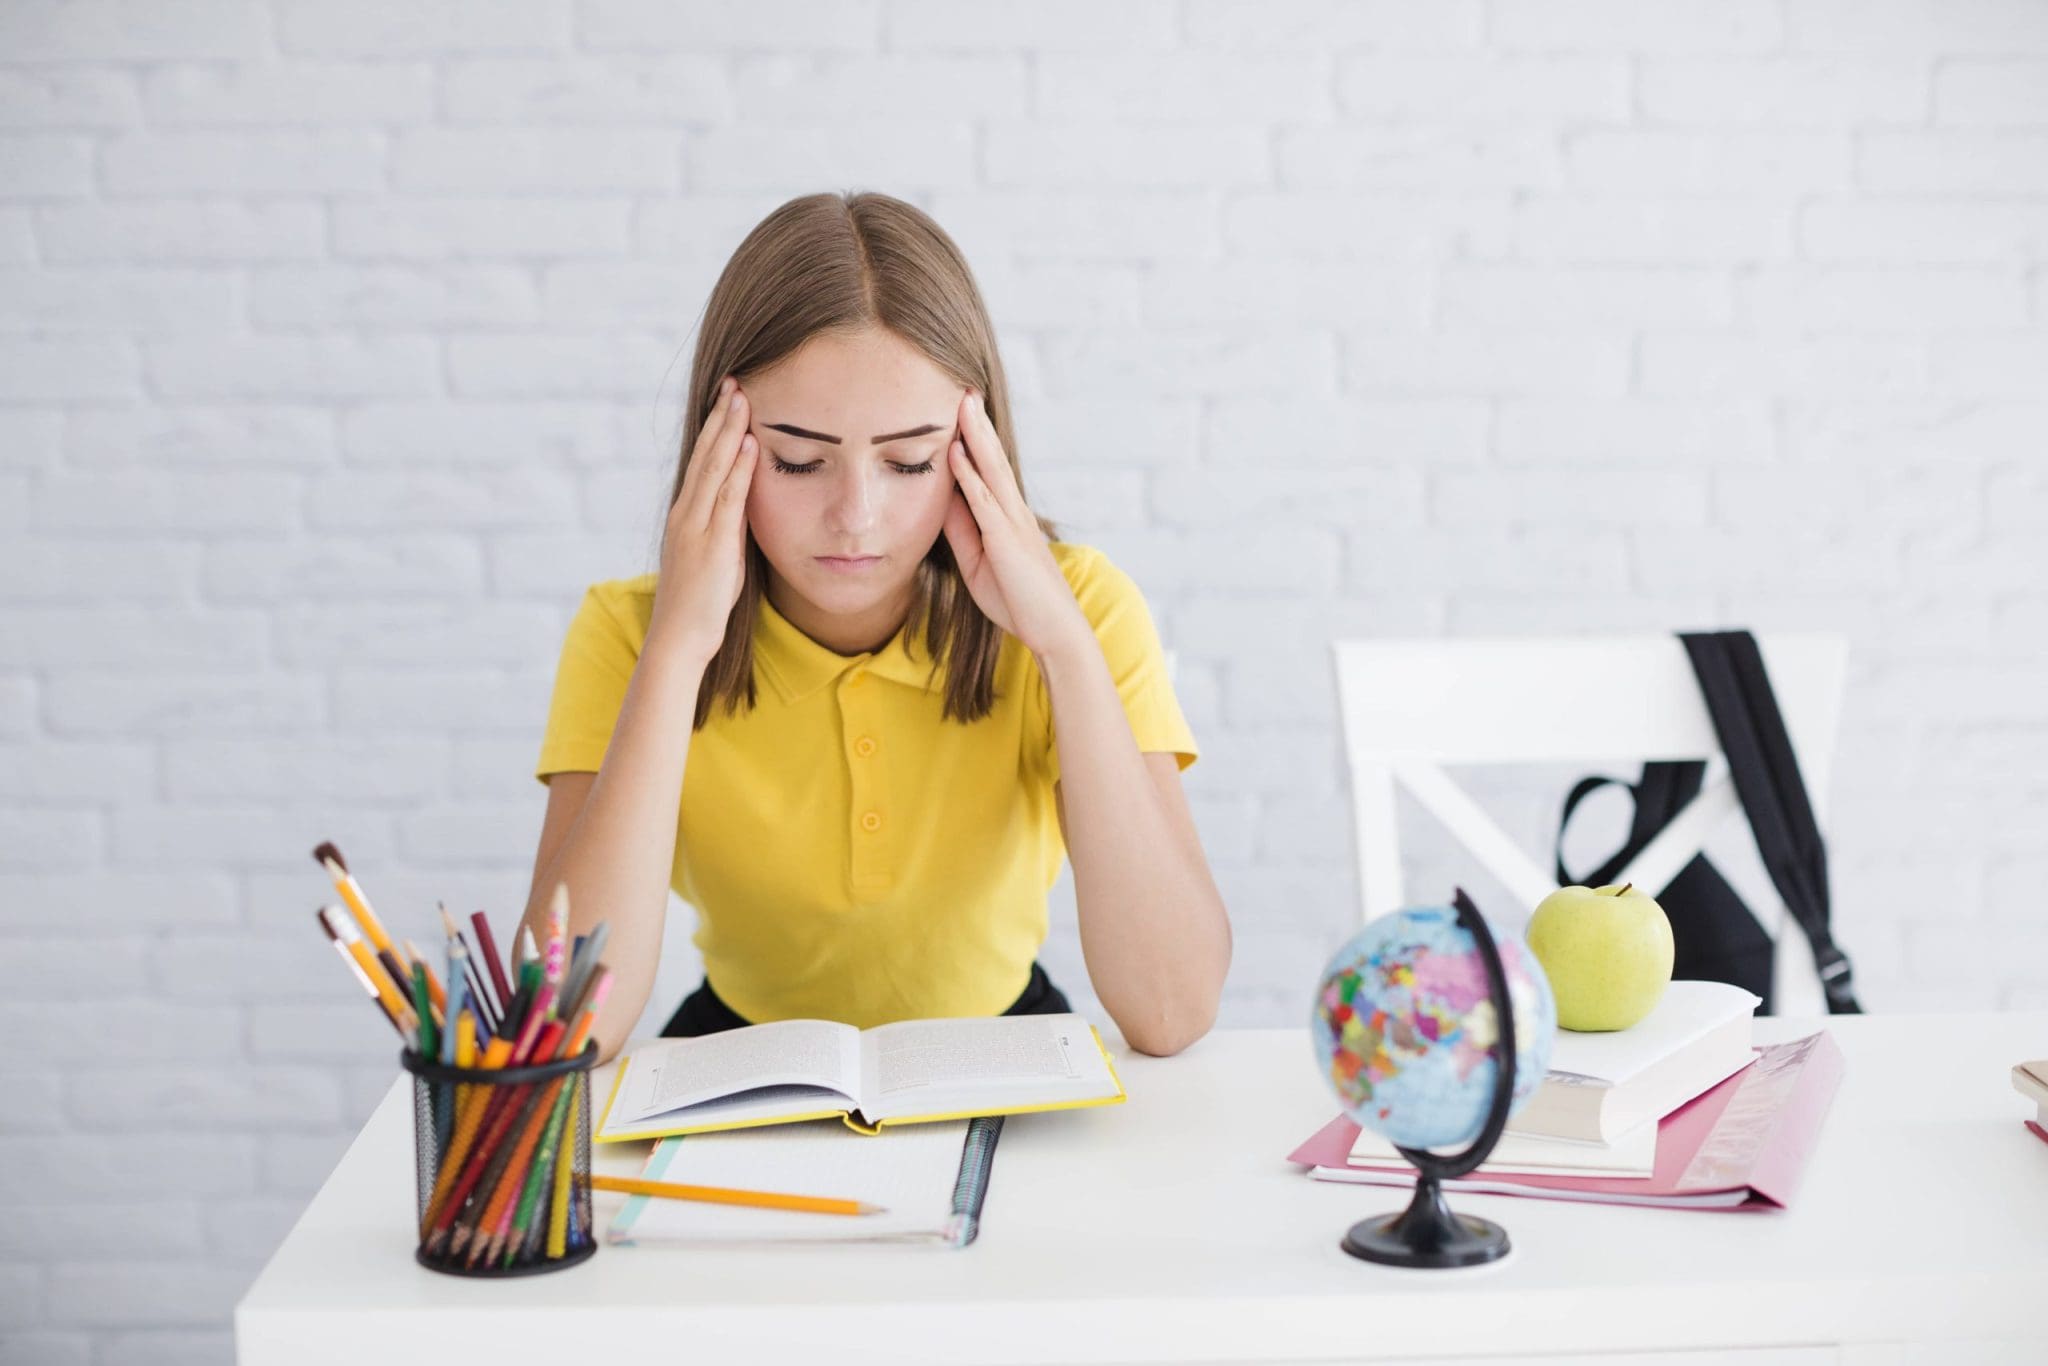 Illustration of a student overwhelmed by exam anxiety. Discover how hypnotherapy can help students overcome stress, enhance focus, and achieve academic success. Take the first step towards a stress-free and confident exam experience with hypnotherapy in Dubai.